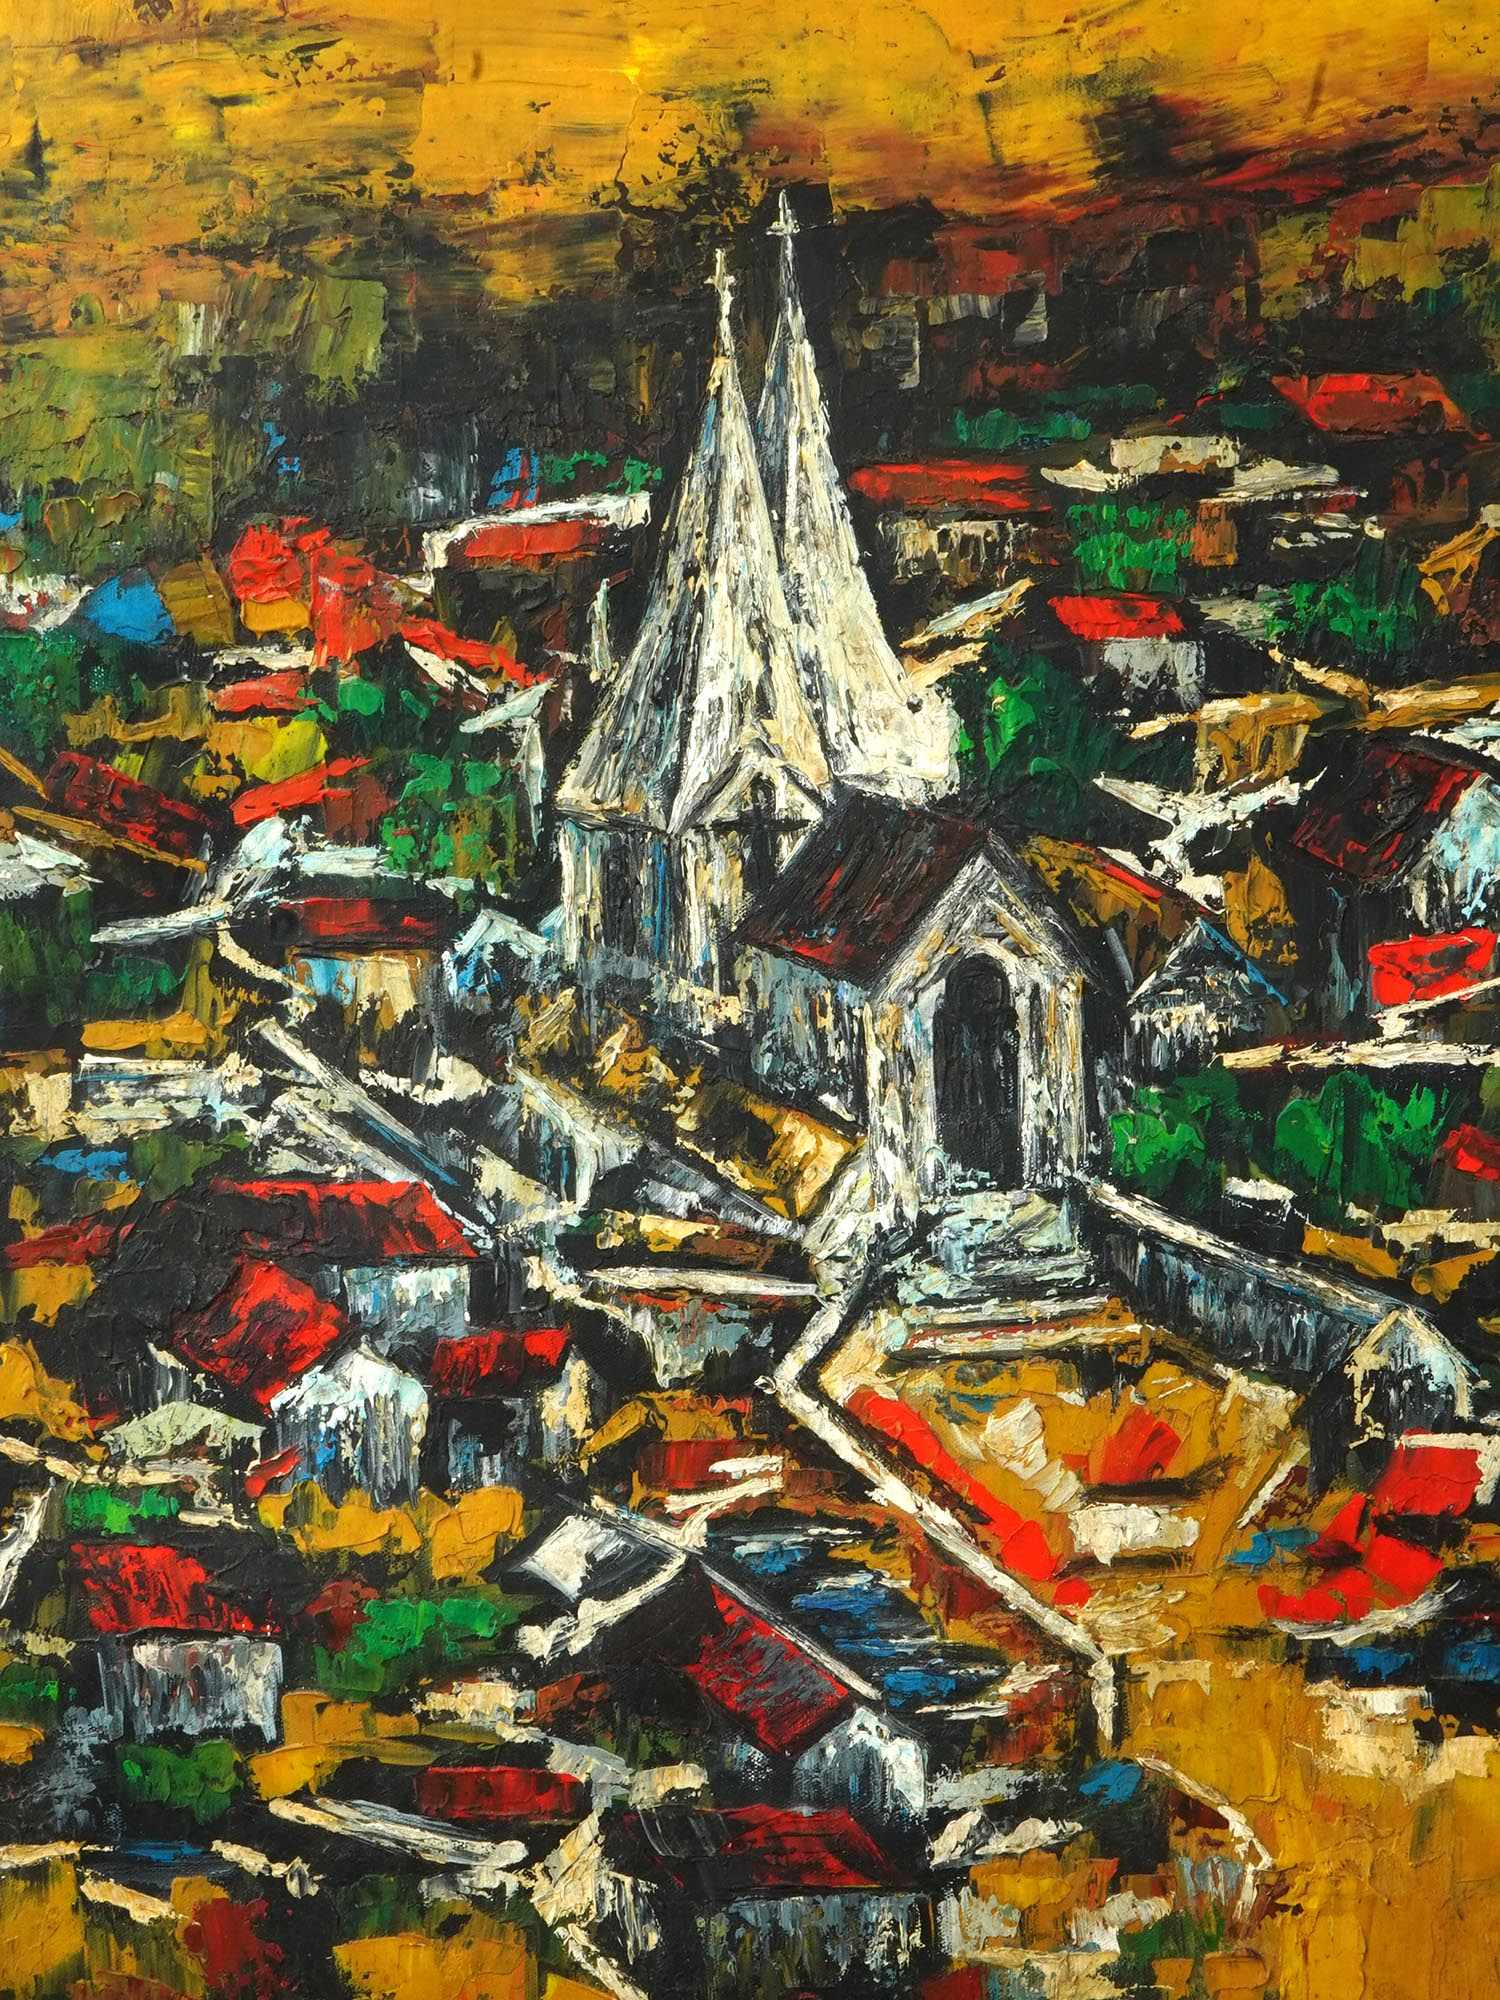 ATTR SYED HAIDER RAZA INDIAN CITYSCAPE OIL PAINTING PIC-1